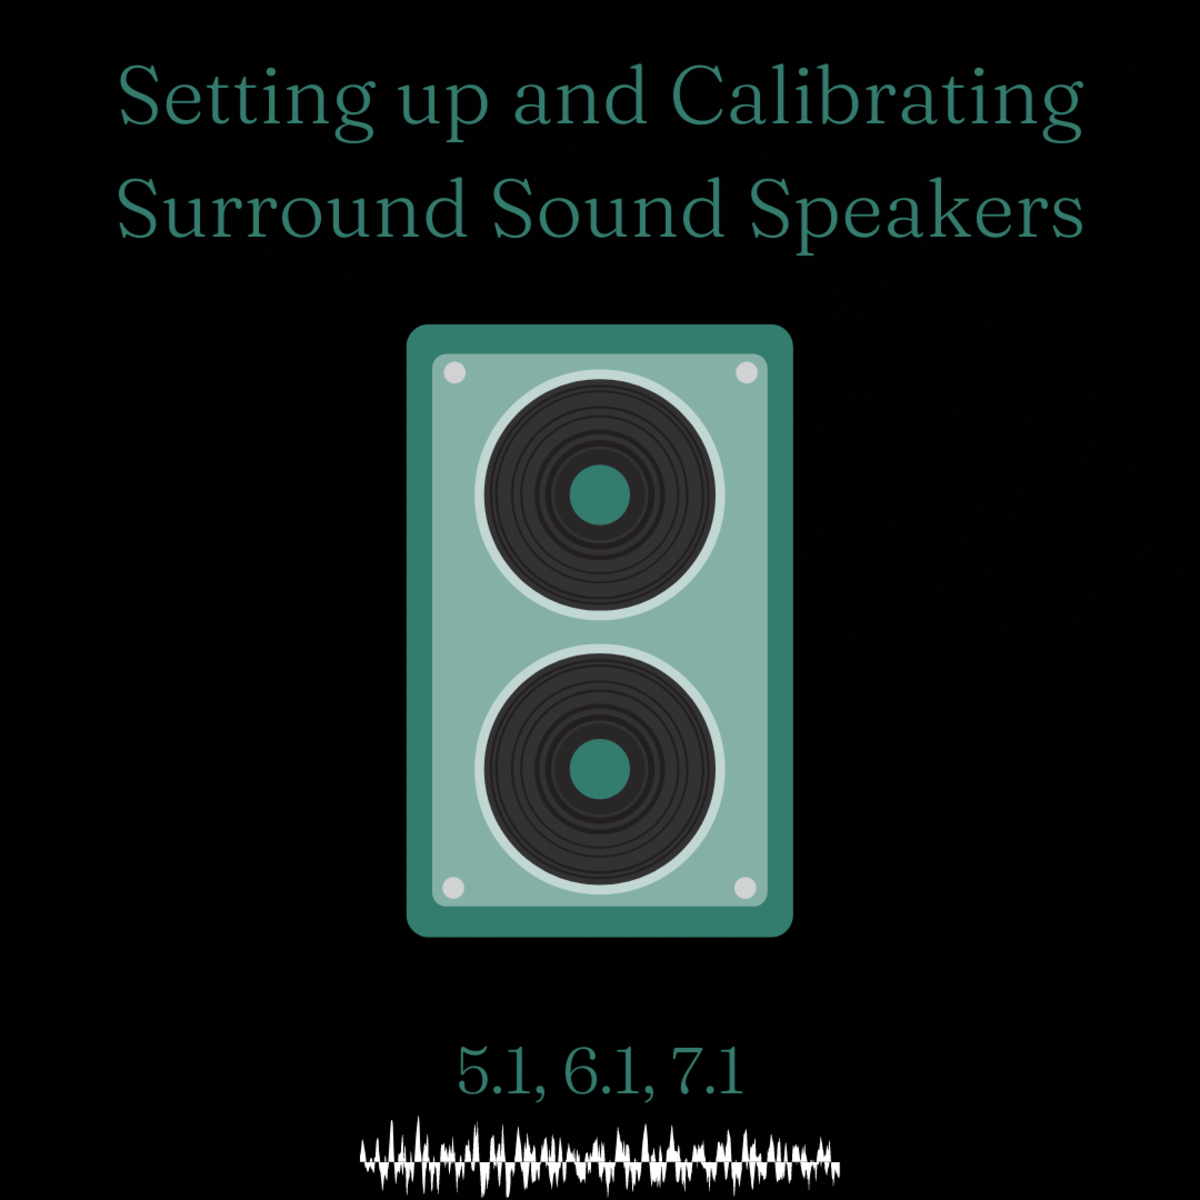 armoede doe alstublieft niet bovenste How to Set up and Calibrate Surround Sound Speaker Systems (5.1, 6.1, 7.1)  - TurboFuture